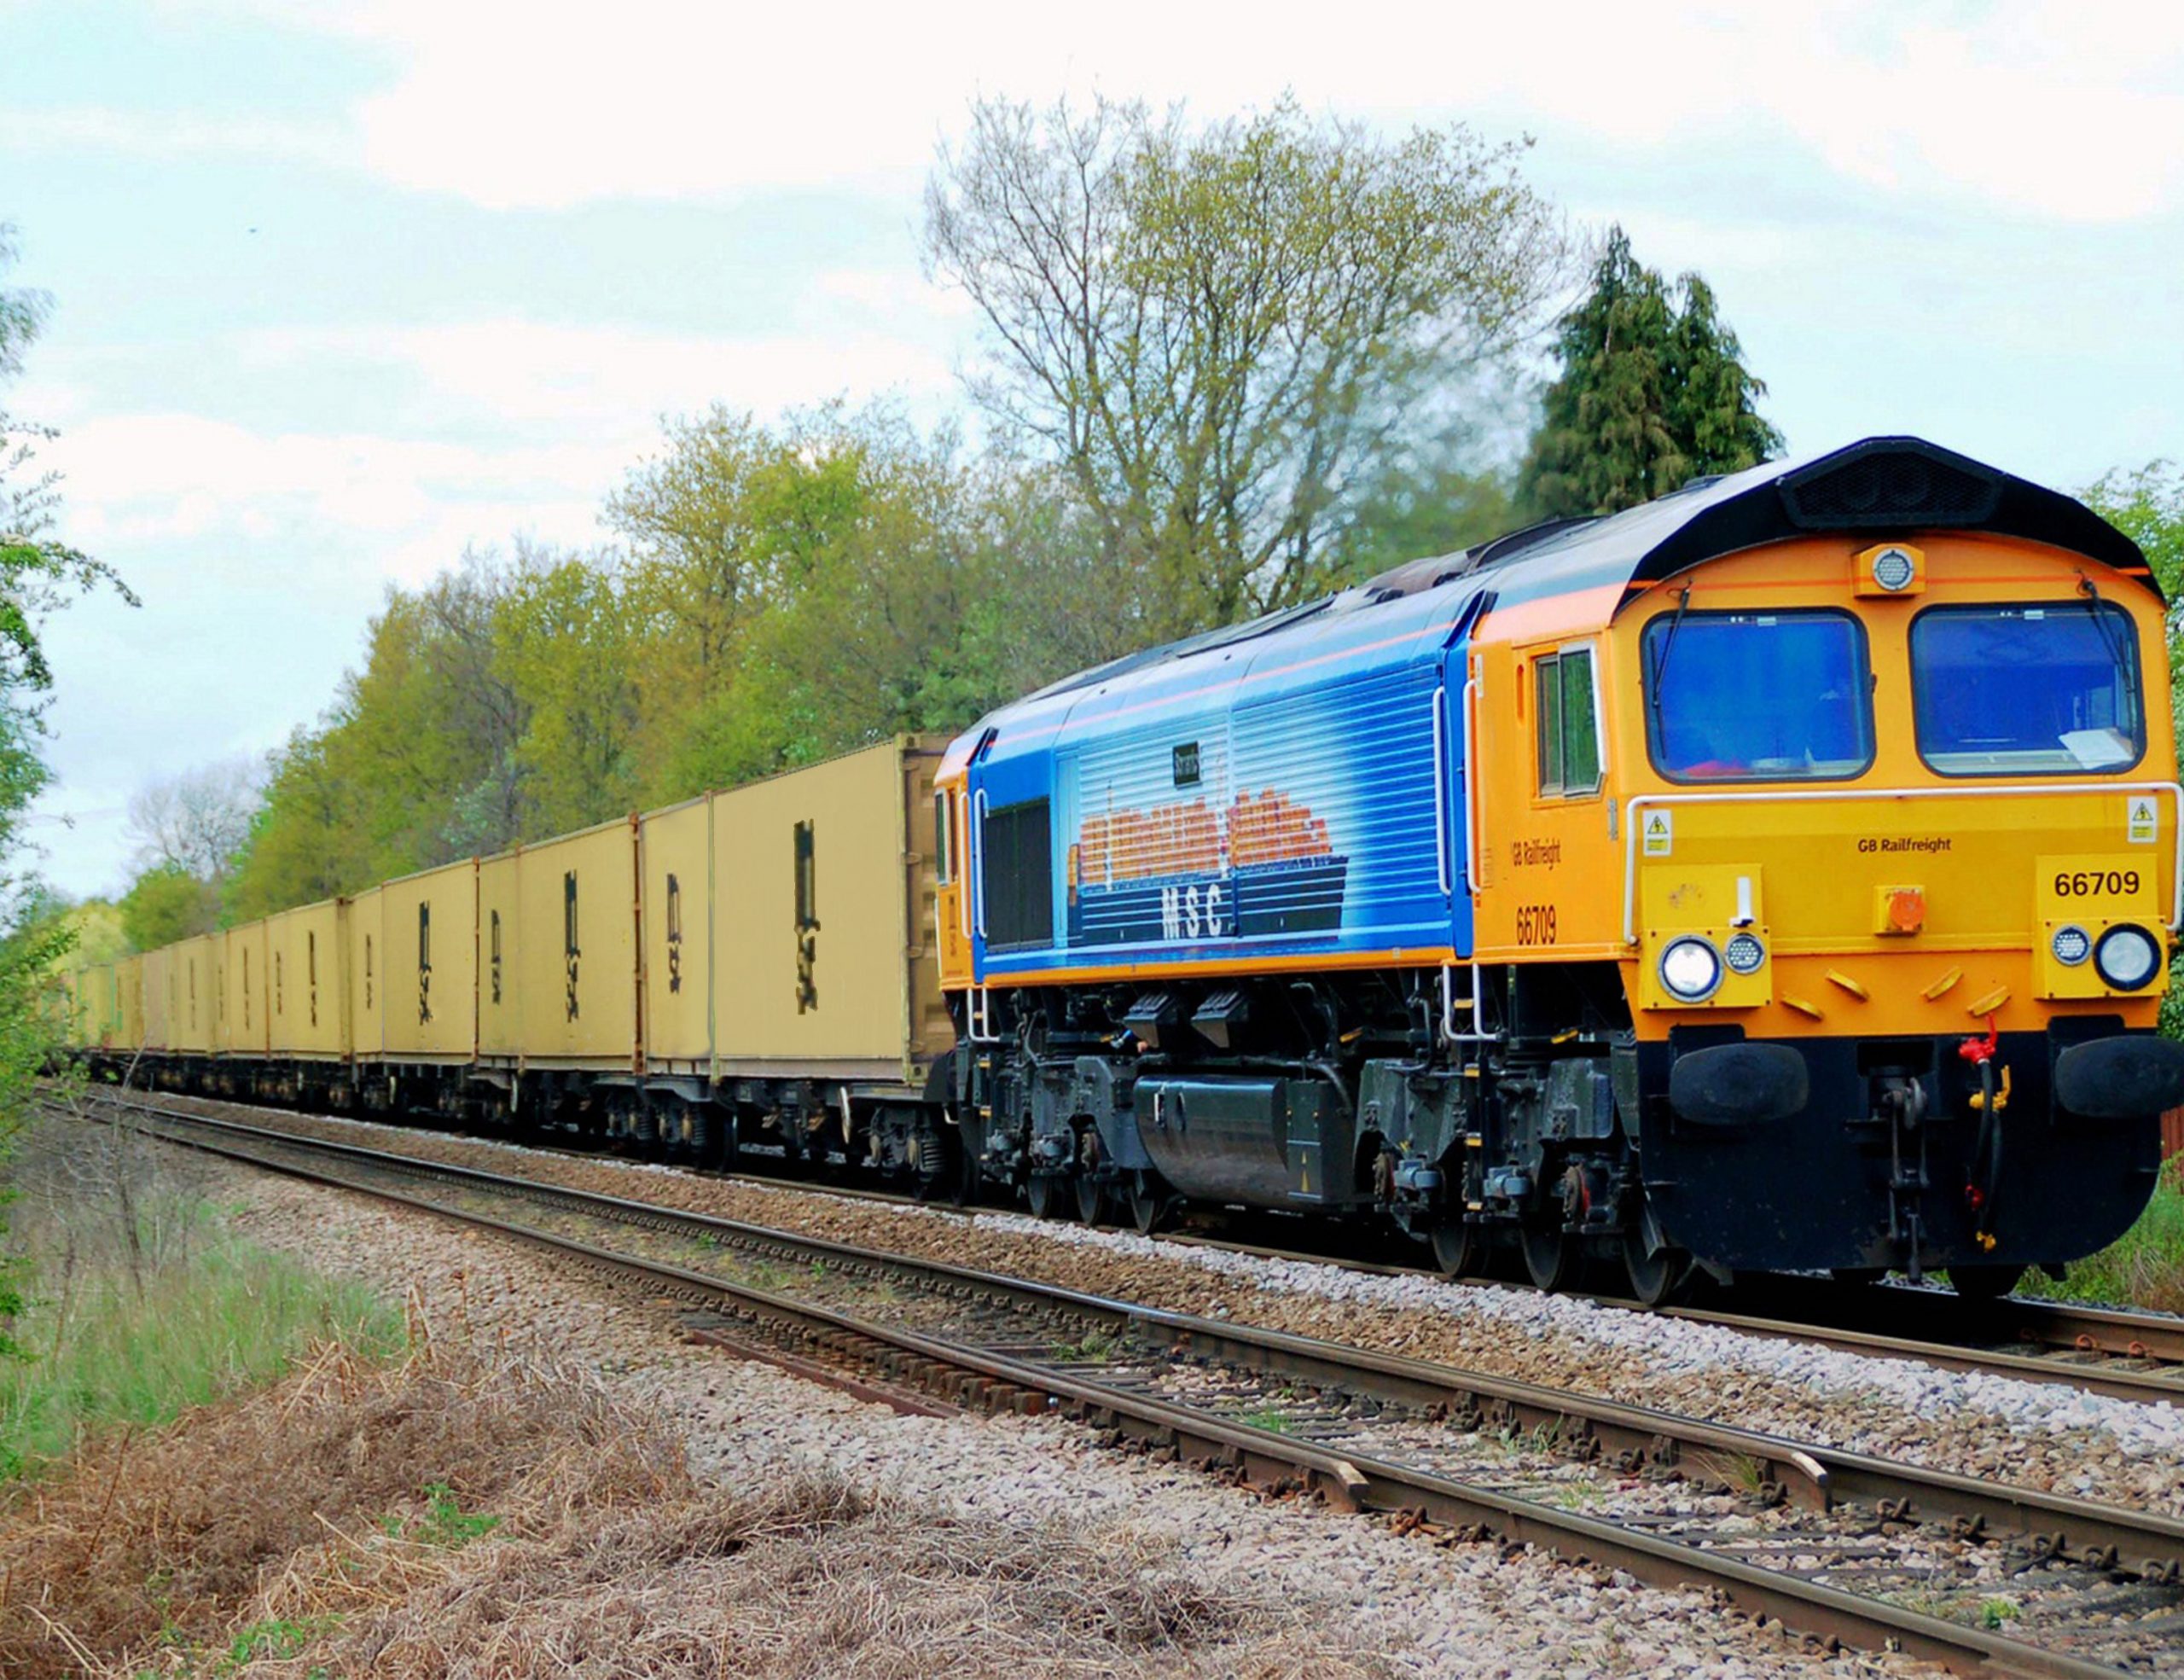 GBRf & MSC UK drive sustainability with new 5-year rail deal